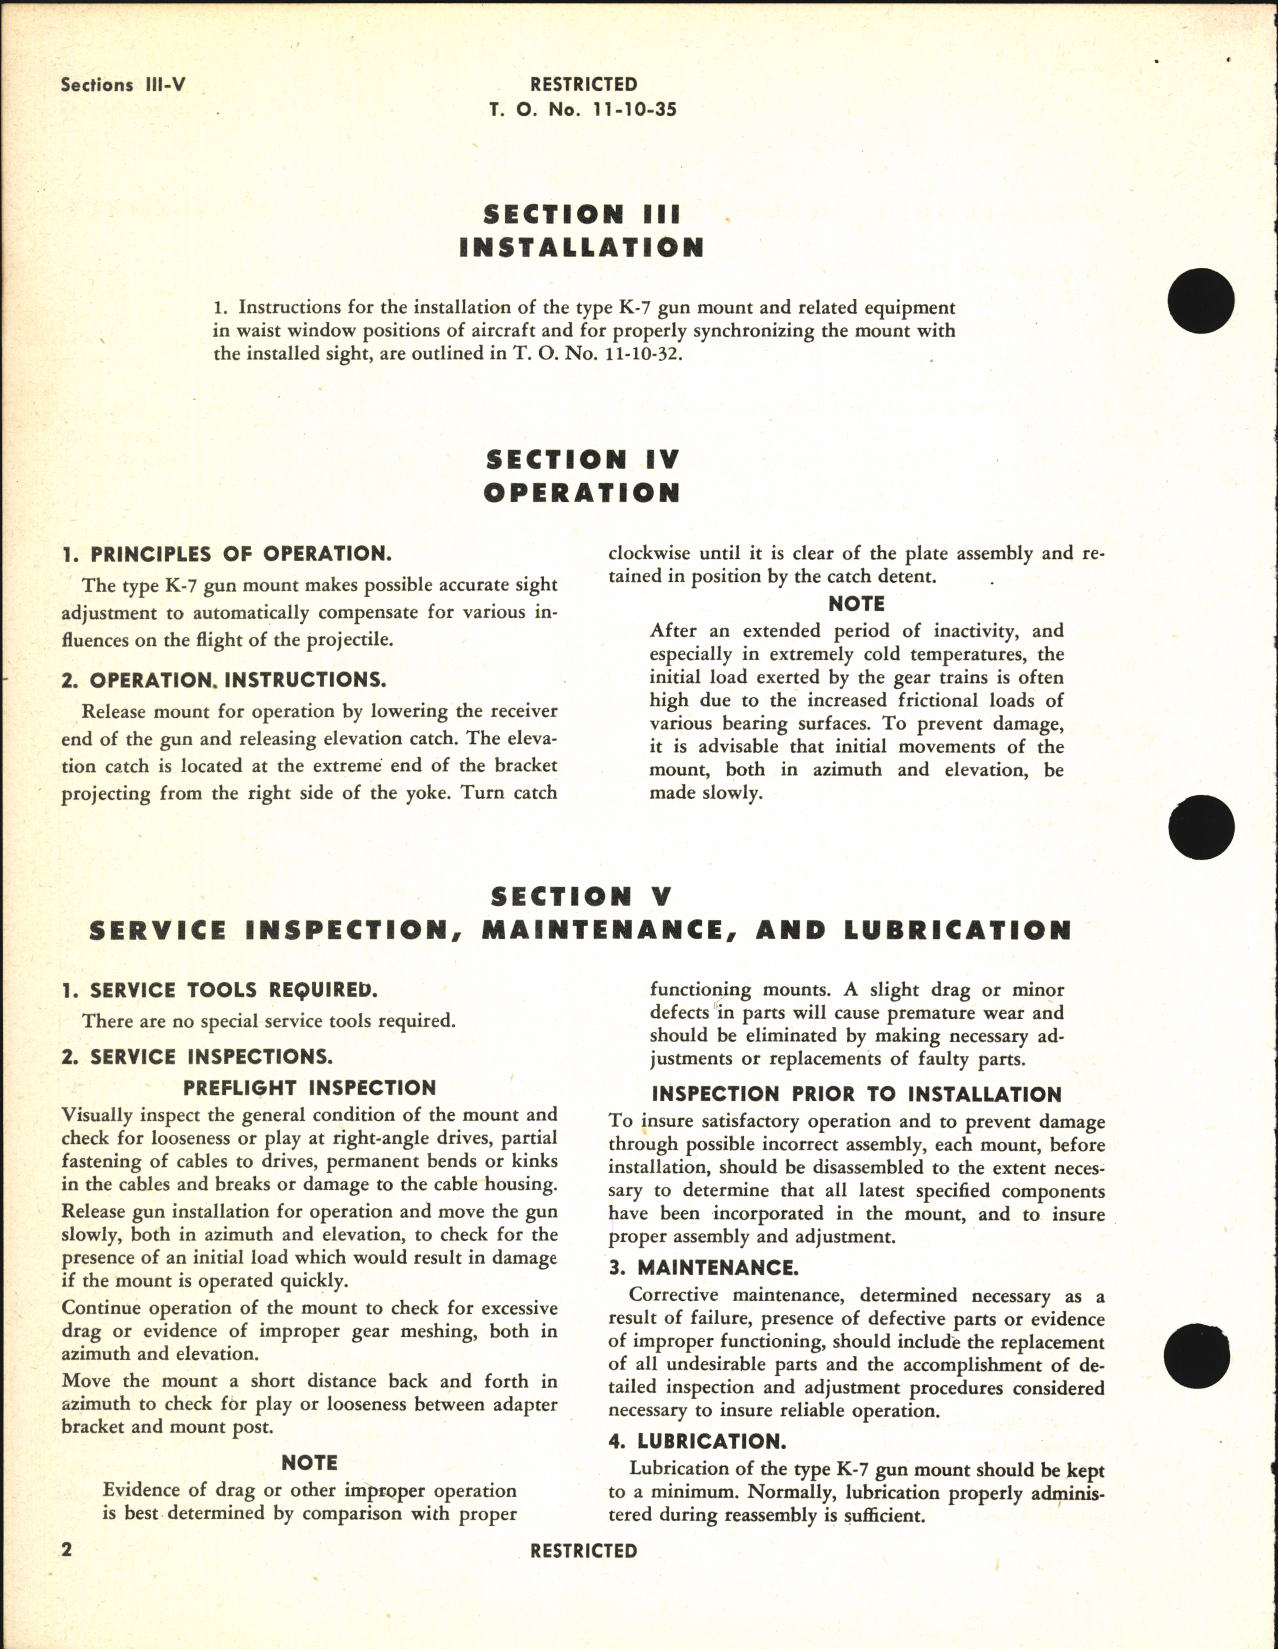 Sample page 6 from AirCorps Library document: Handbook of Instructions with Parts Catalog for Gun Mount Type K-7